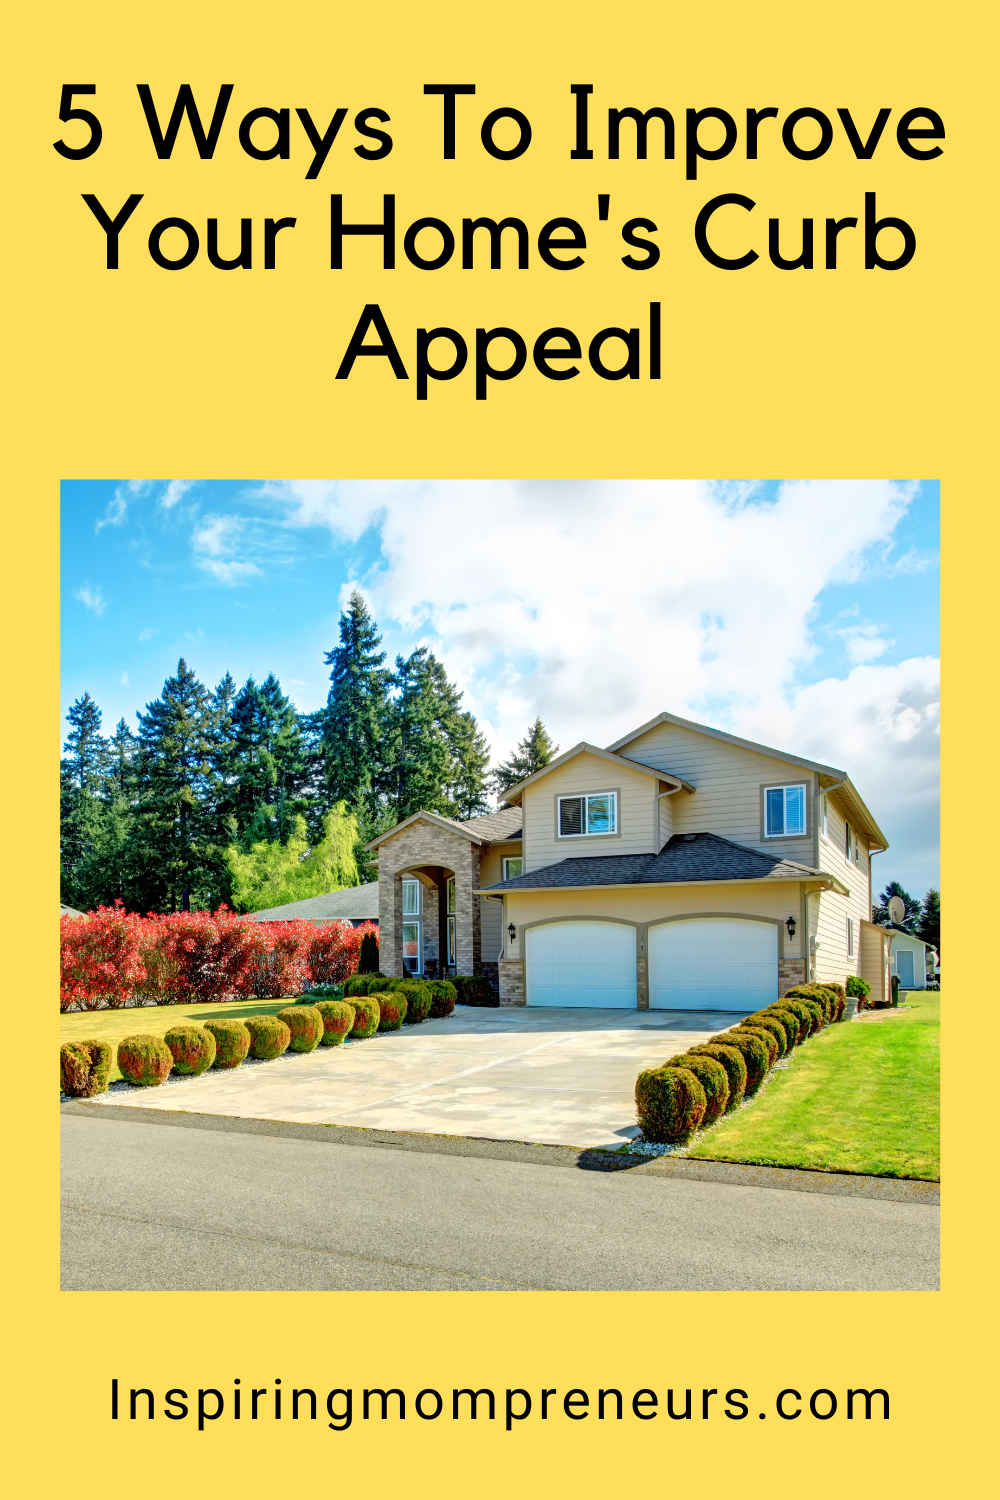 improve your home's curb appeal